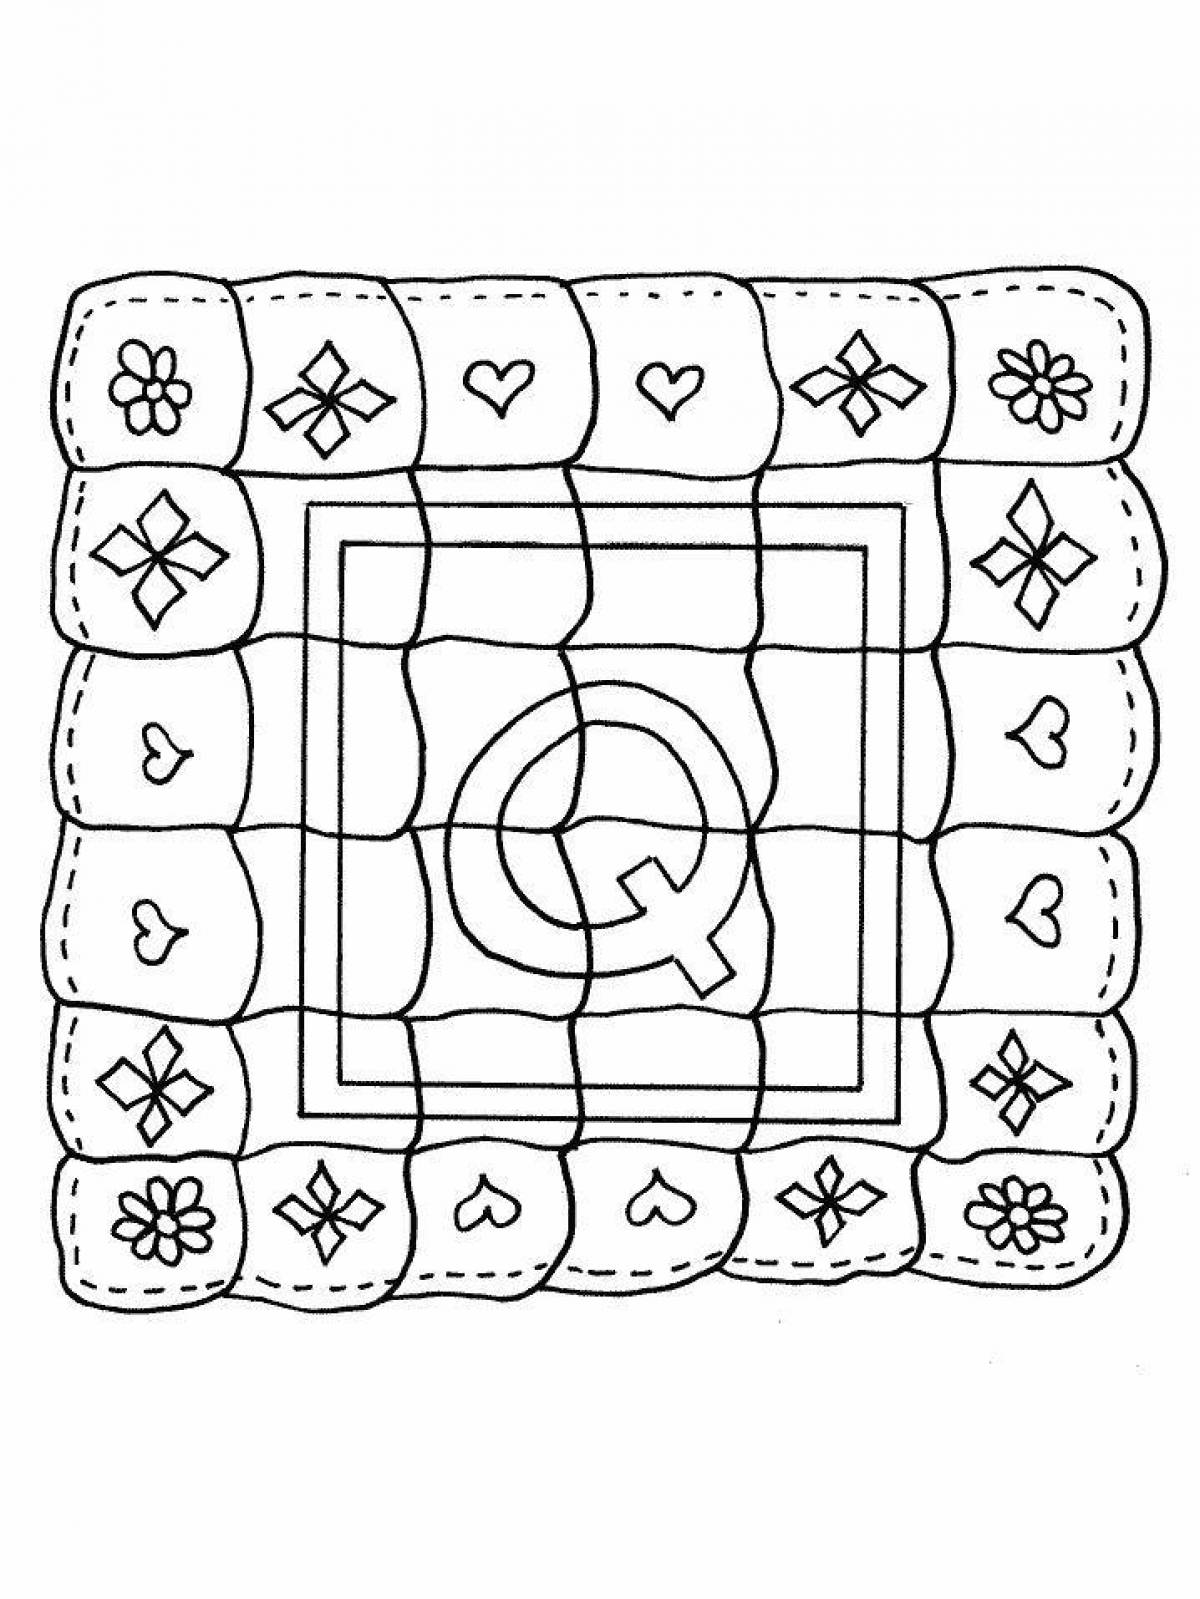 Coloring page magic blanket